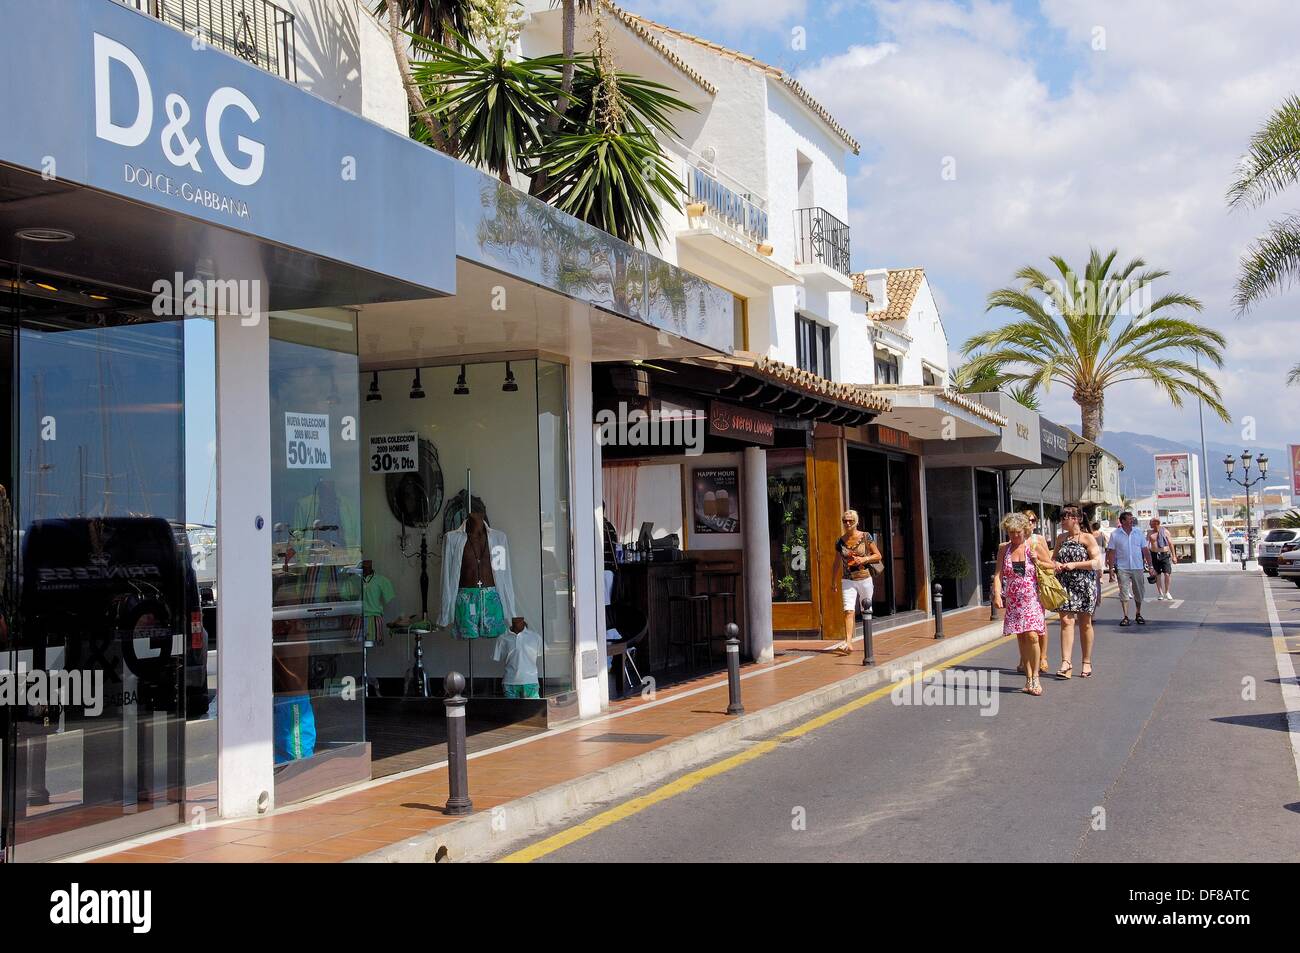 Puerto Banus, Spain - August 15, 2015: Shopping Center In Puerto Banus, A  Marina Near Marbella, Andalusia. Several Street Vendors Expect To Sell Your  Goods Stock Photo, Picture and Royalty Free Image. Image 46586477.